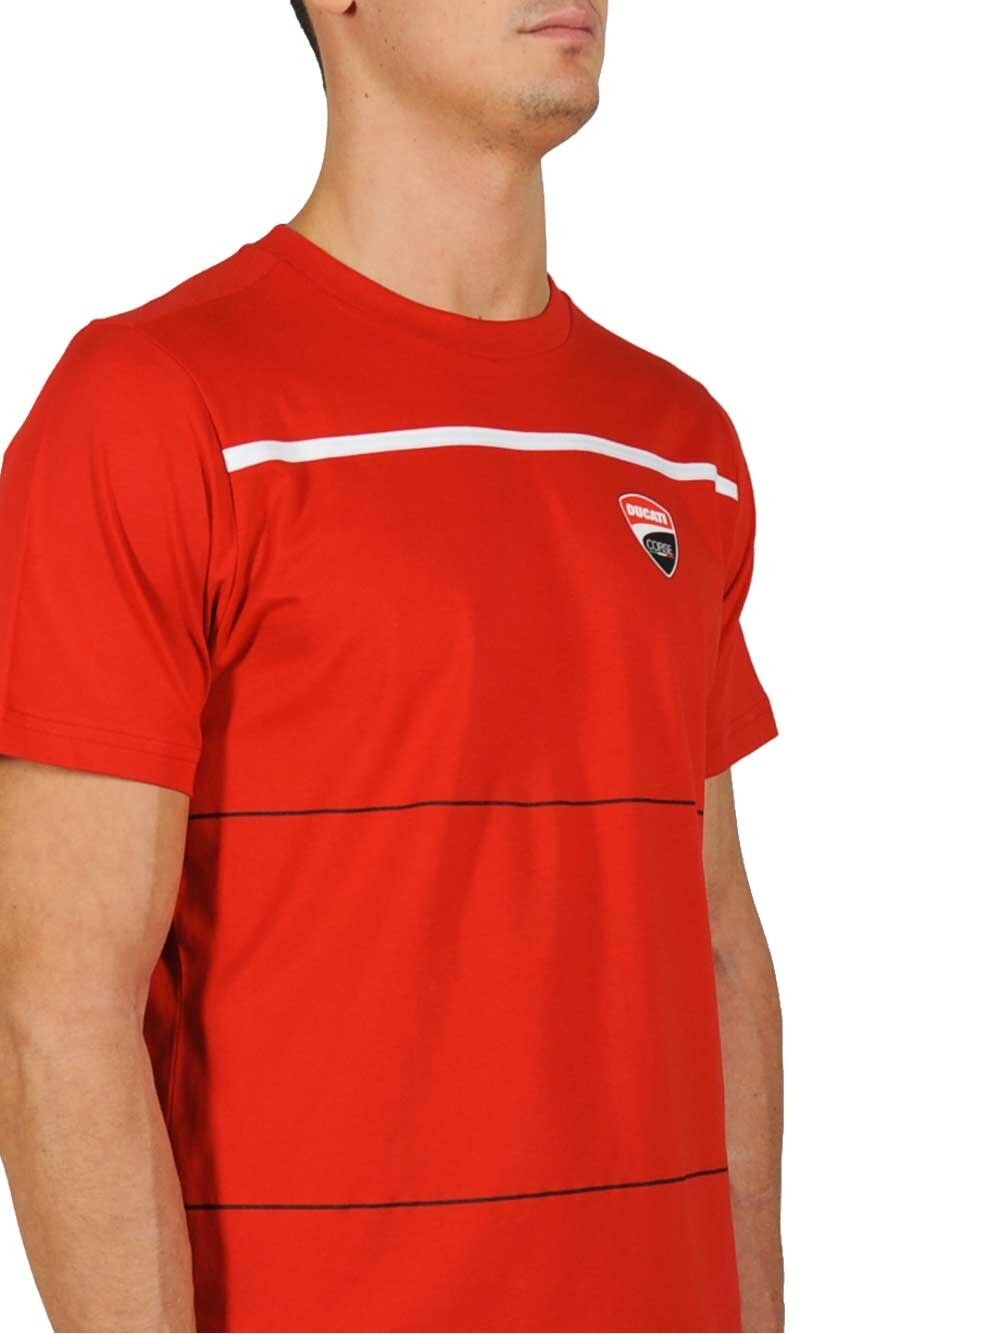 New Official Ducati Corse Red T'Shirt - 15 36002